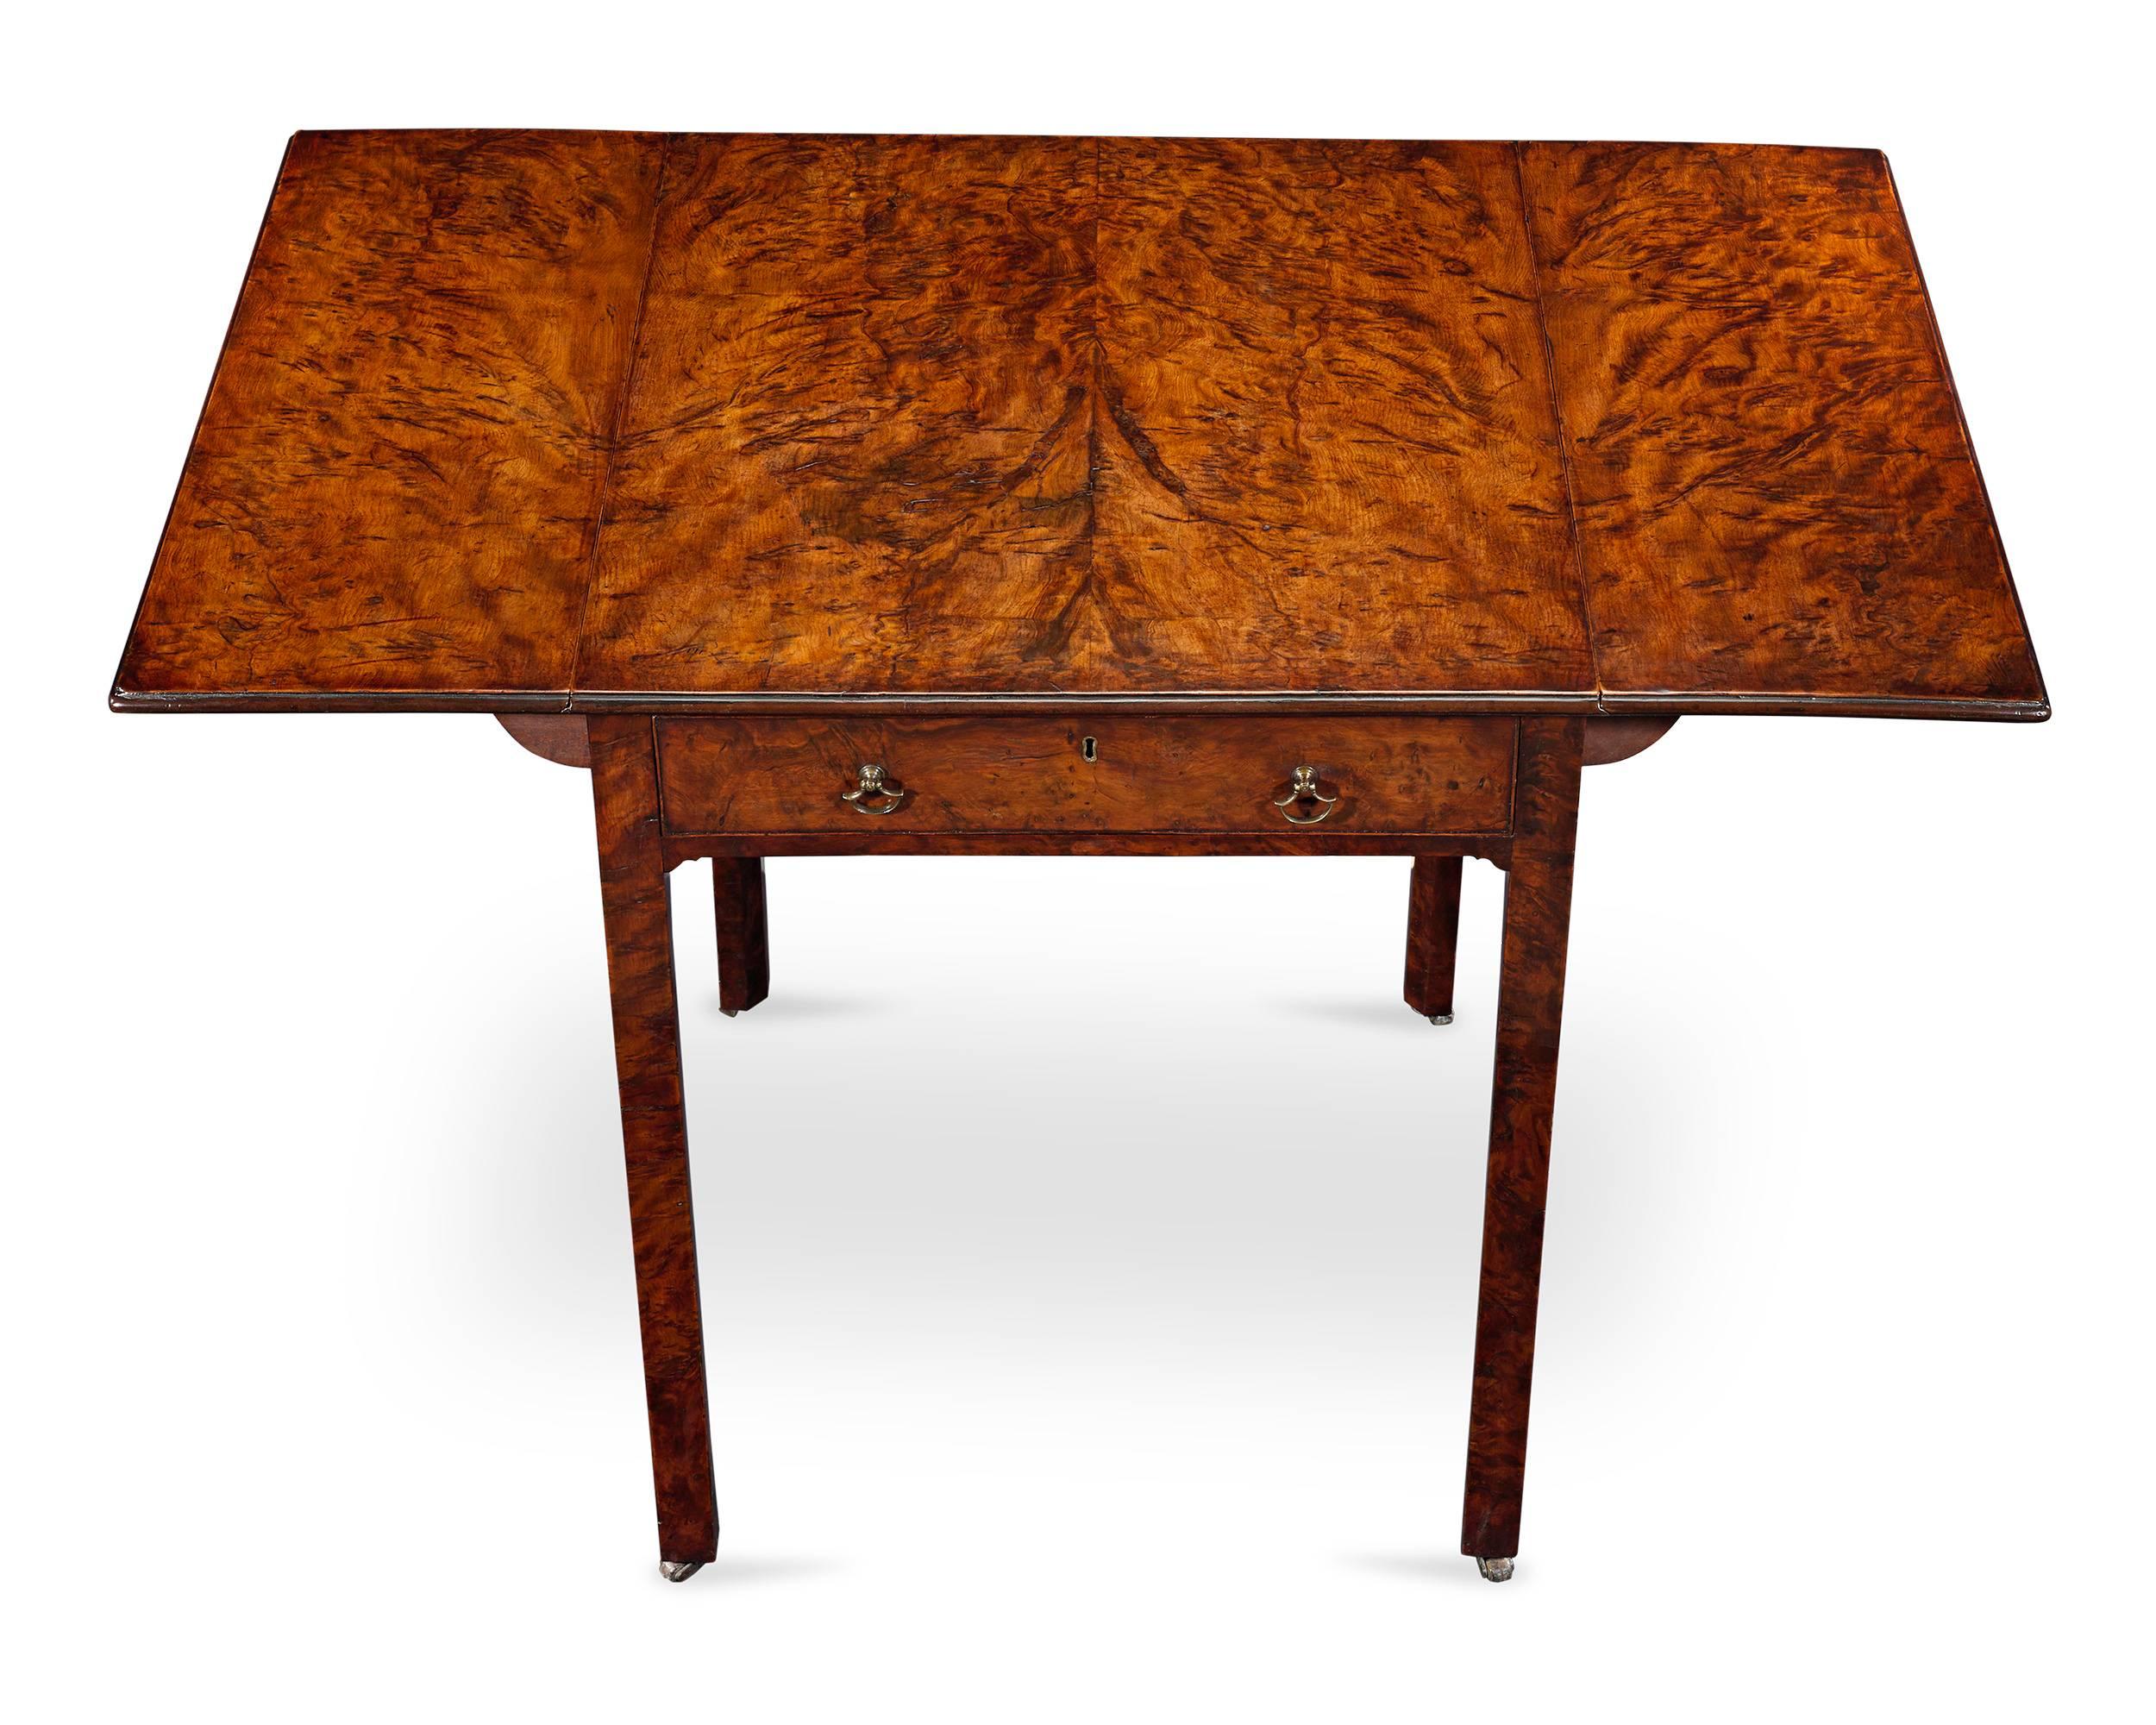 George II Thomas Chippendale Burr Yew Pembroke Table